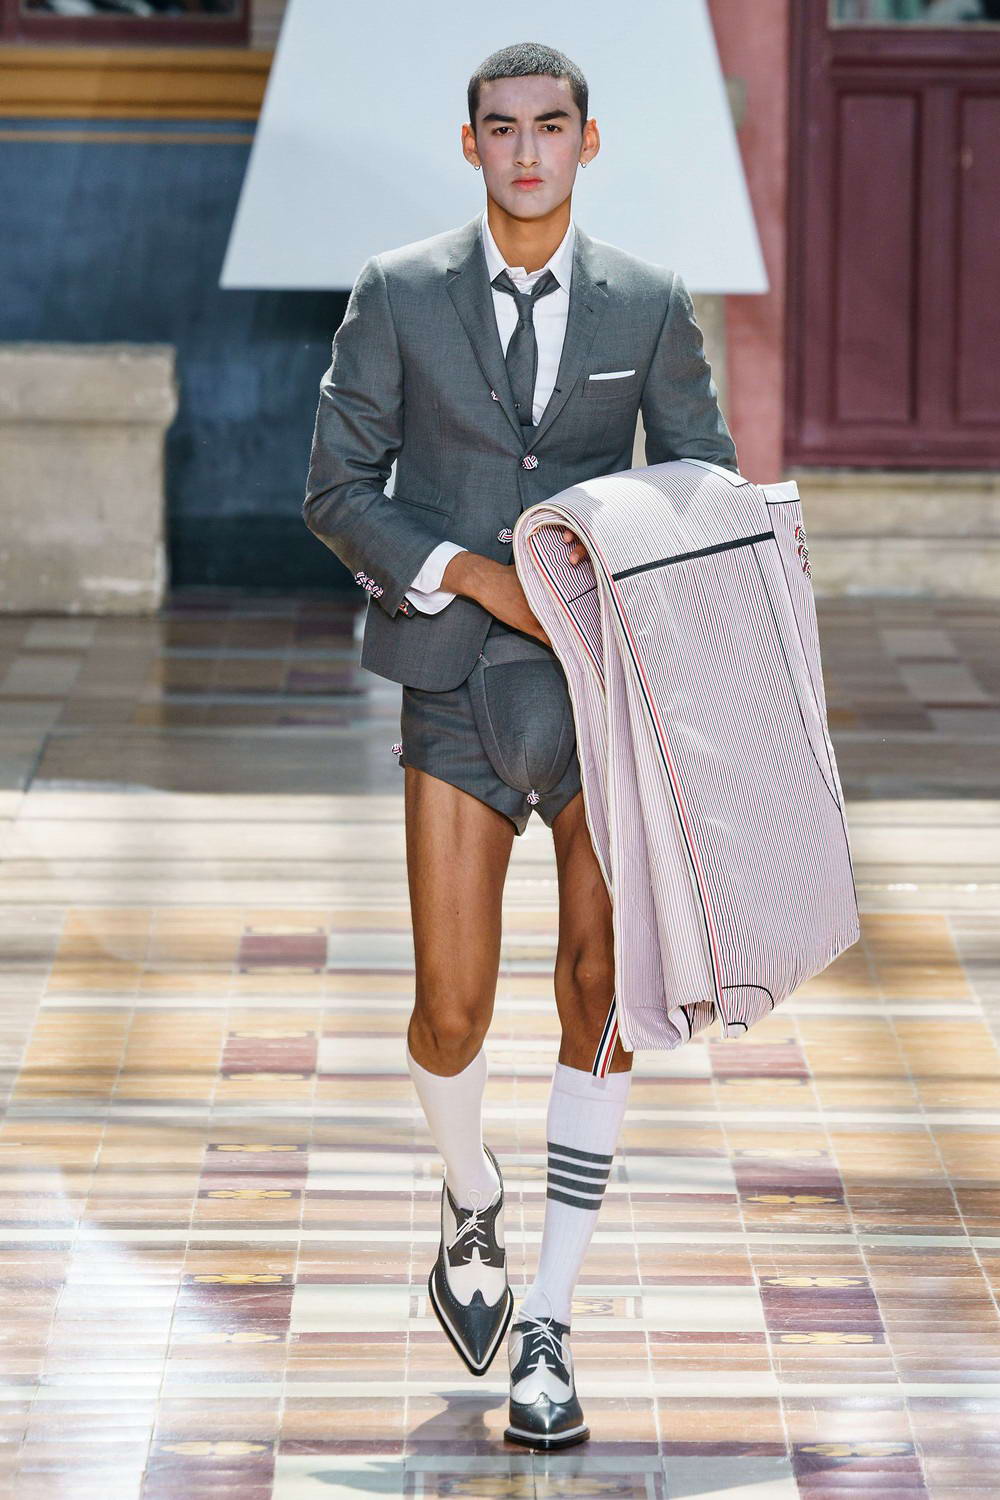 Men's Summer Fashion 2020 Featuring Skirts and Dresses for the Fellas ...